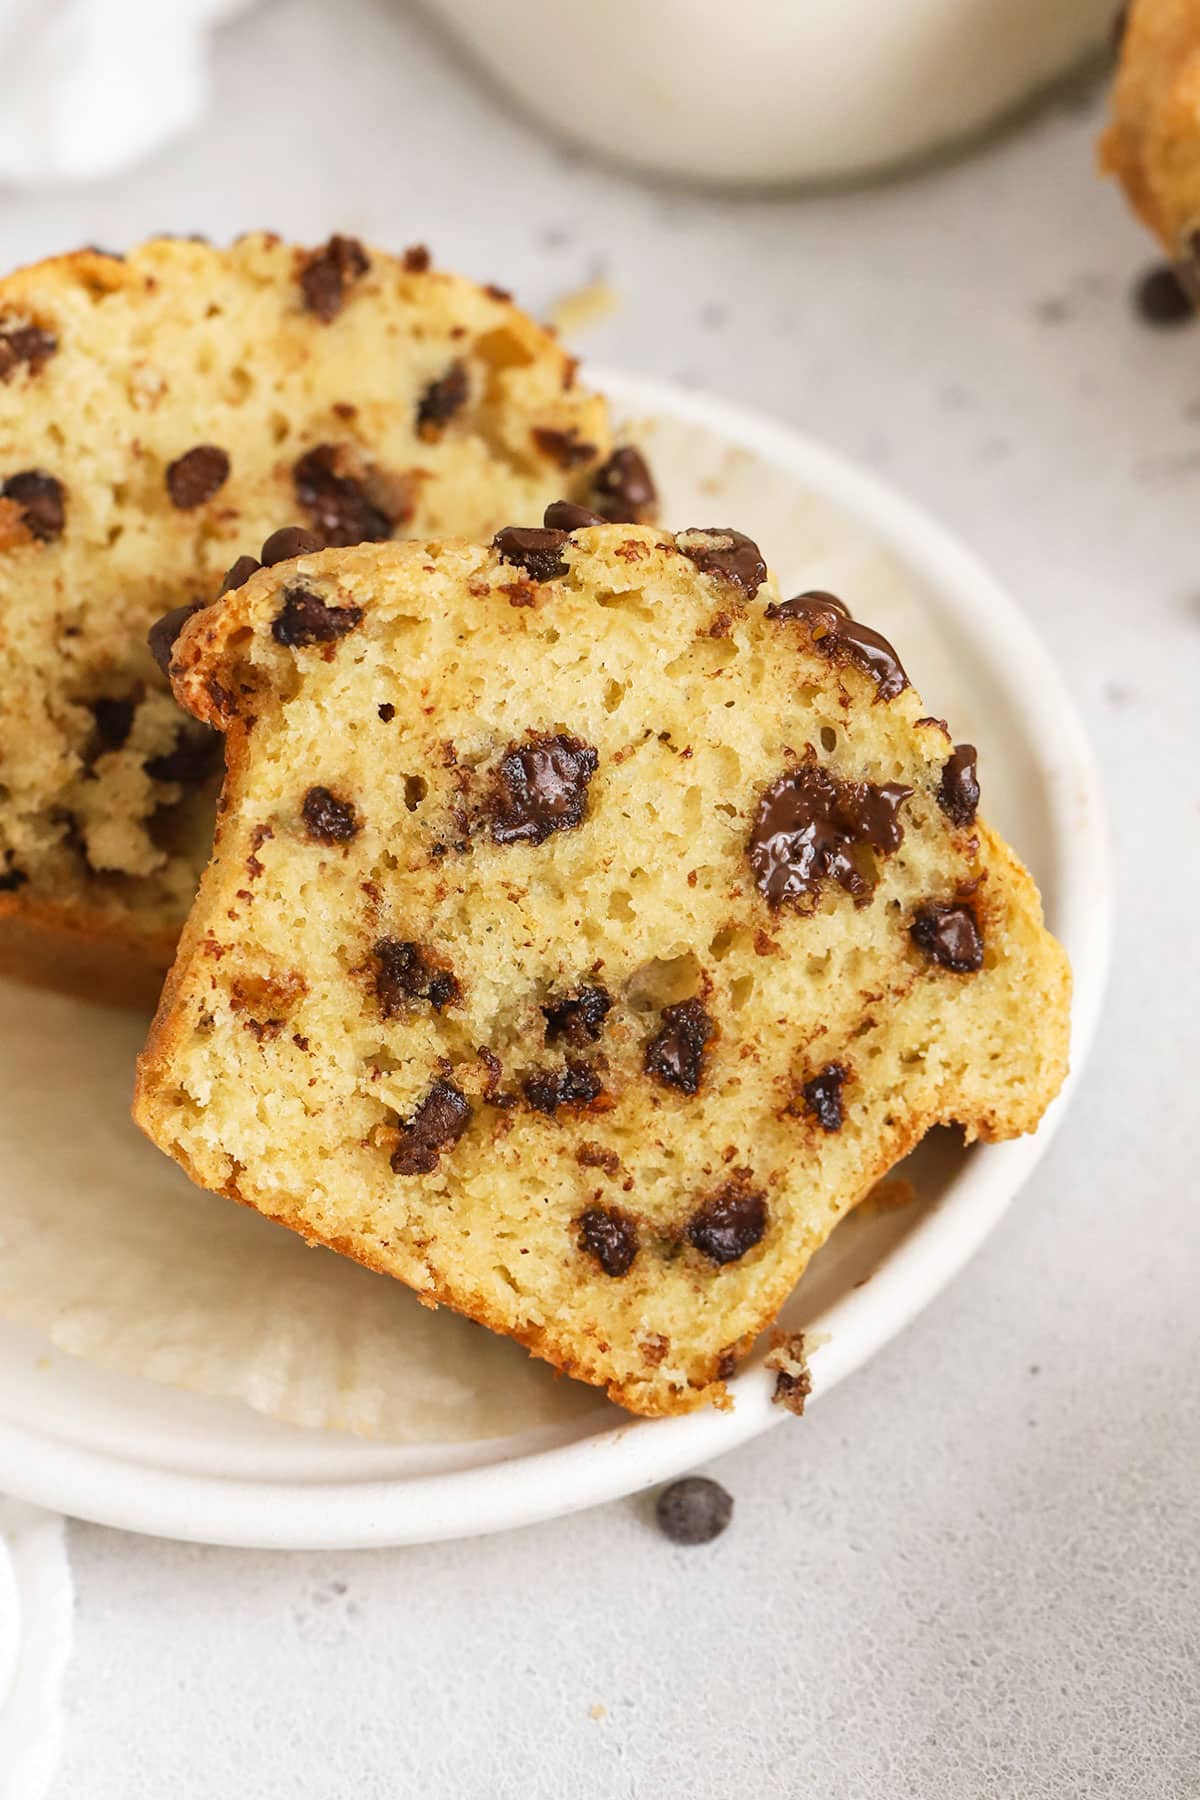 Gluten-free chocolate chip muffins cut in half to show a fluffy center